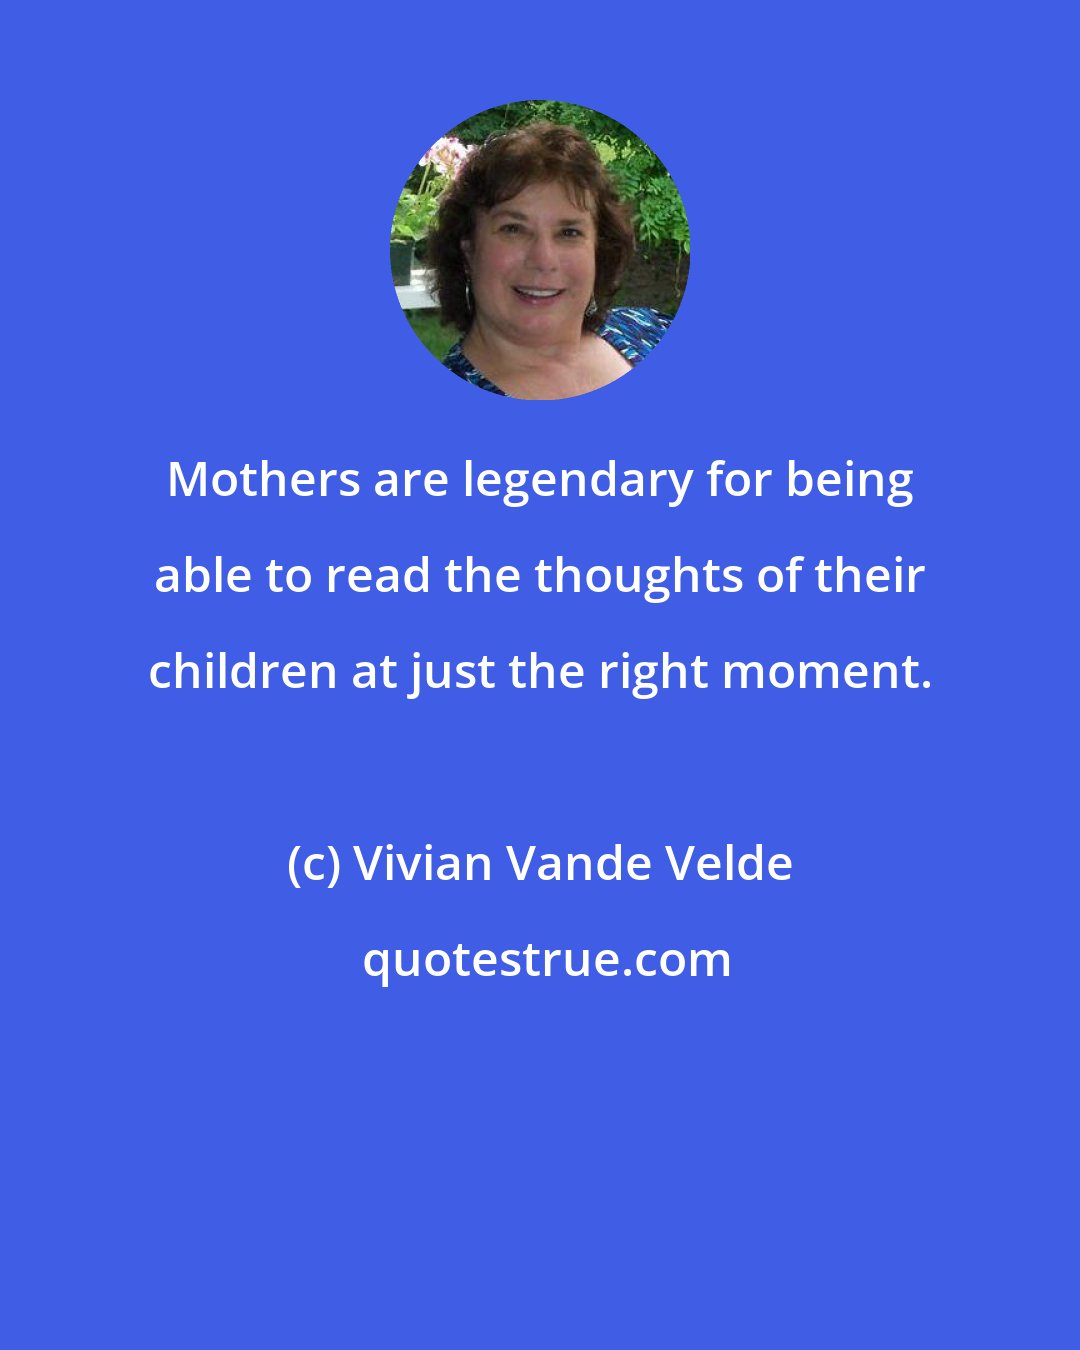 Vivian Vande Velde: Mothers are legendary for being able to read the thoughts of their children at just the right moment.